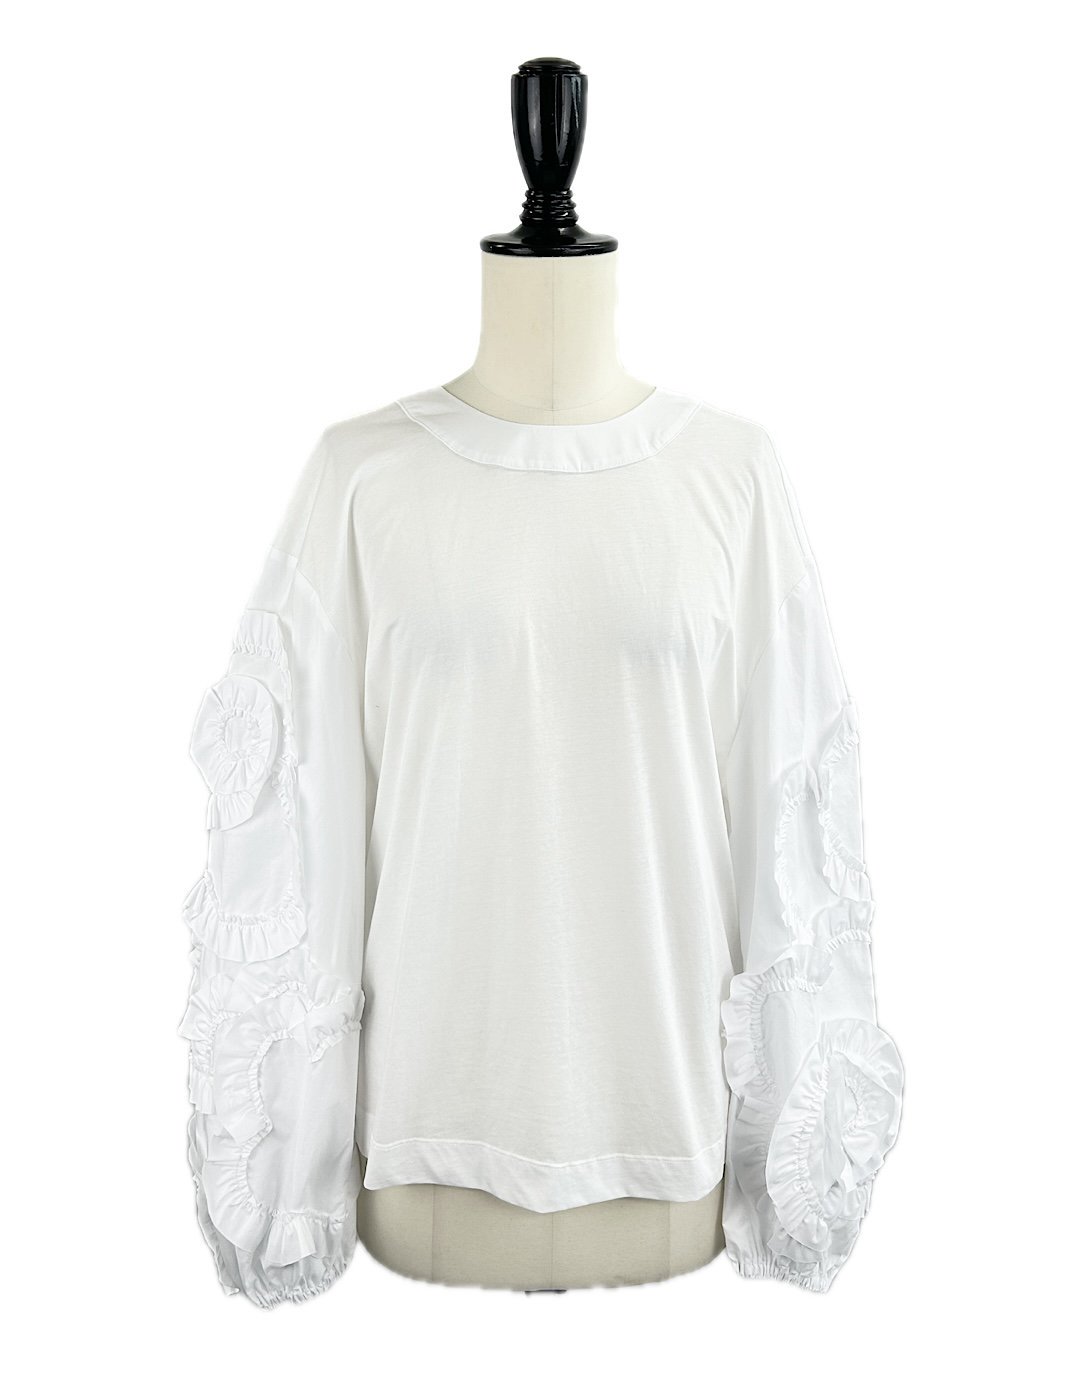 <img class='new_mark_img1' src='https://img.shop-pro.jp/img/new/icons6.gif' style='border:none;display:inline;margin:0px;padding:0px;width:auto;' />30offMEIMEIJ / FLOWER MOTIF SLEEVE TOP